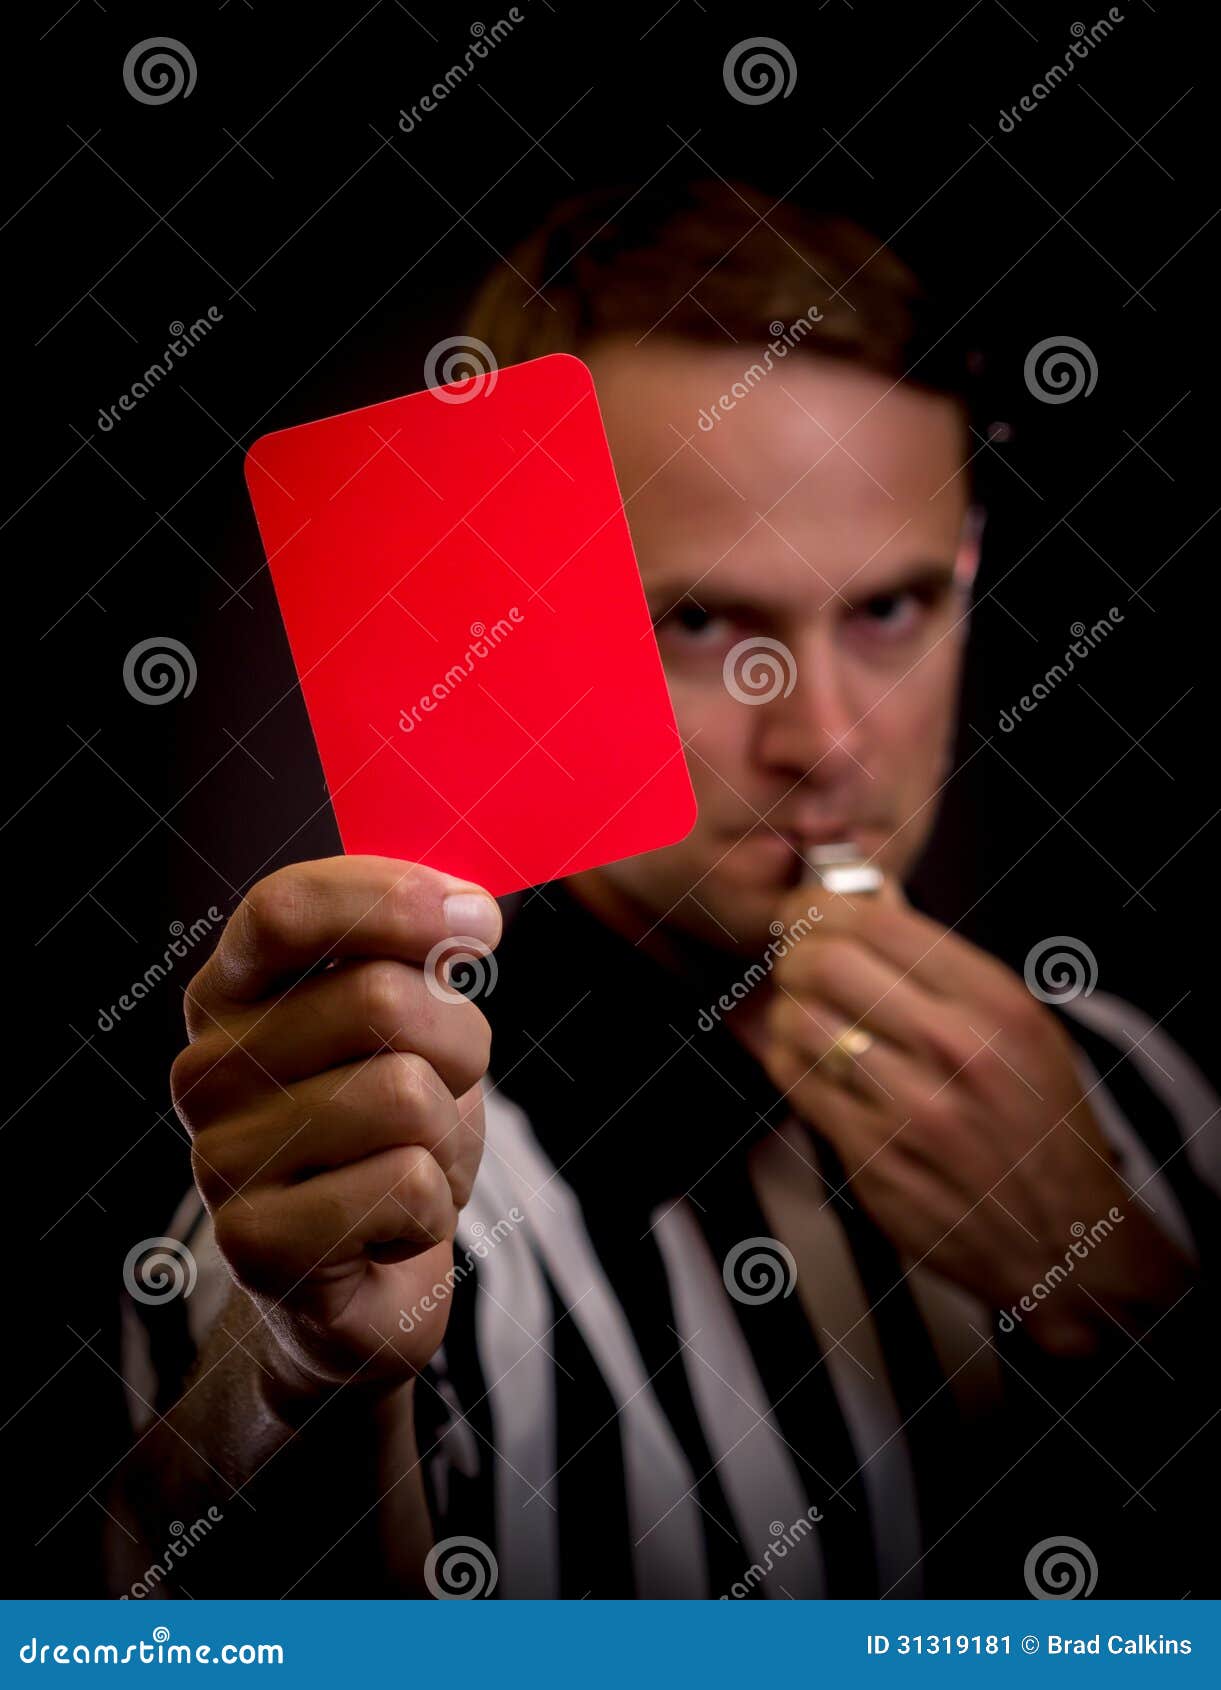 662 Referee Holding Red Card Stock Photos - Free & Royalty-Free